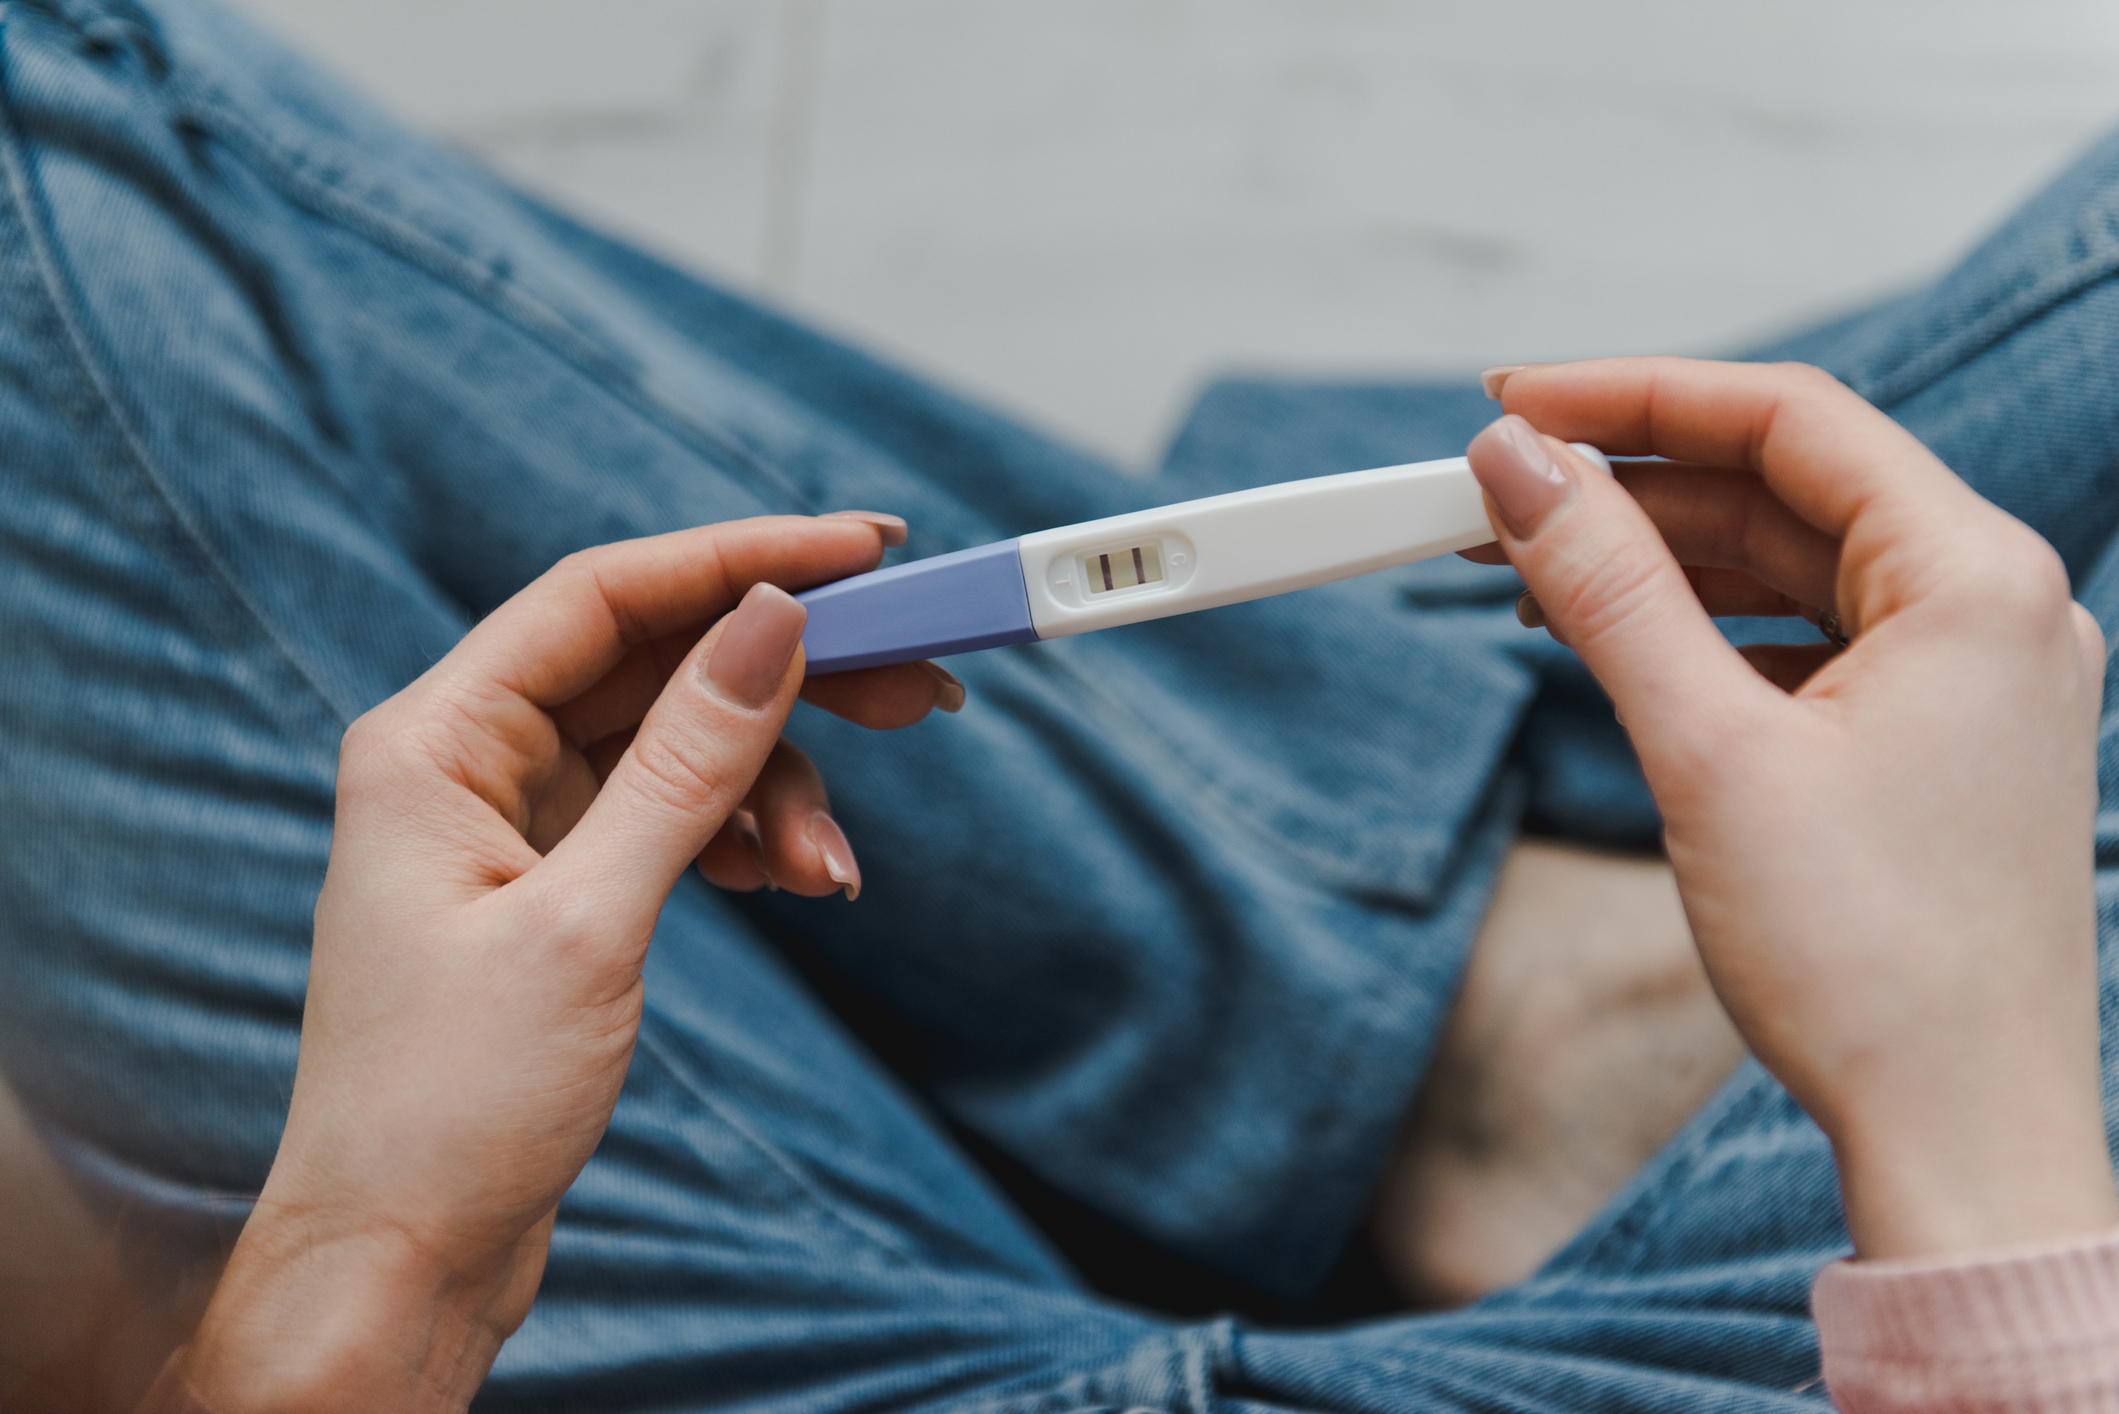 Person holding a pregnancy test showing a positive result while seated